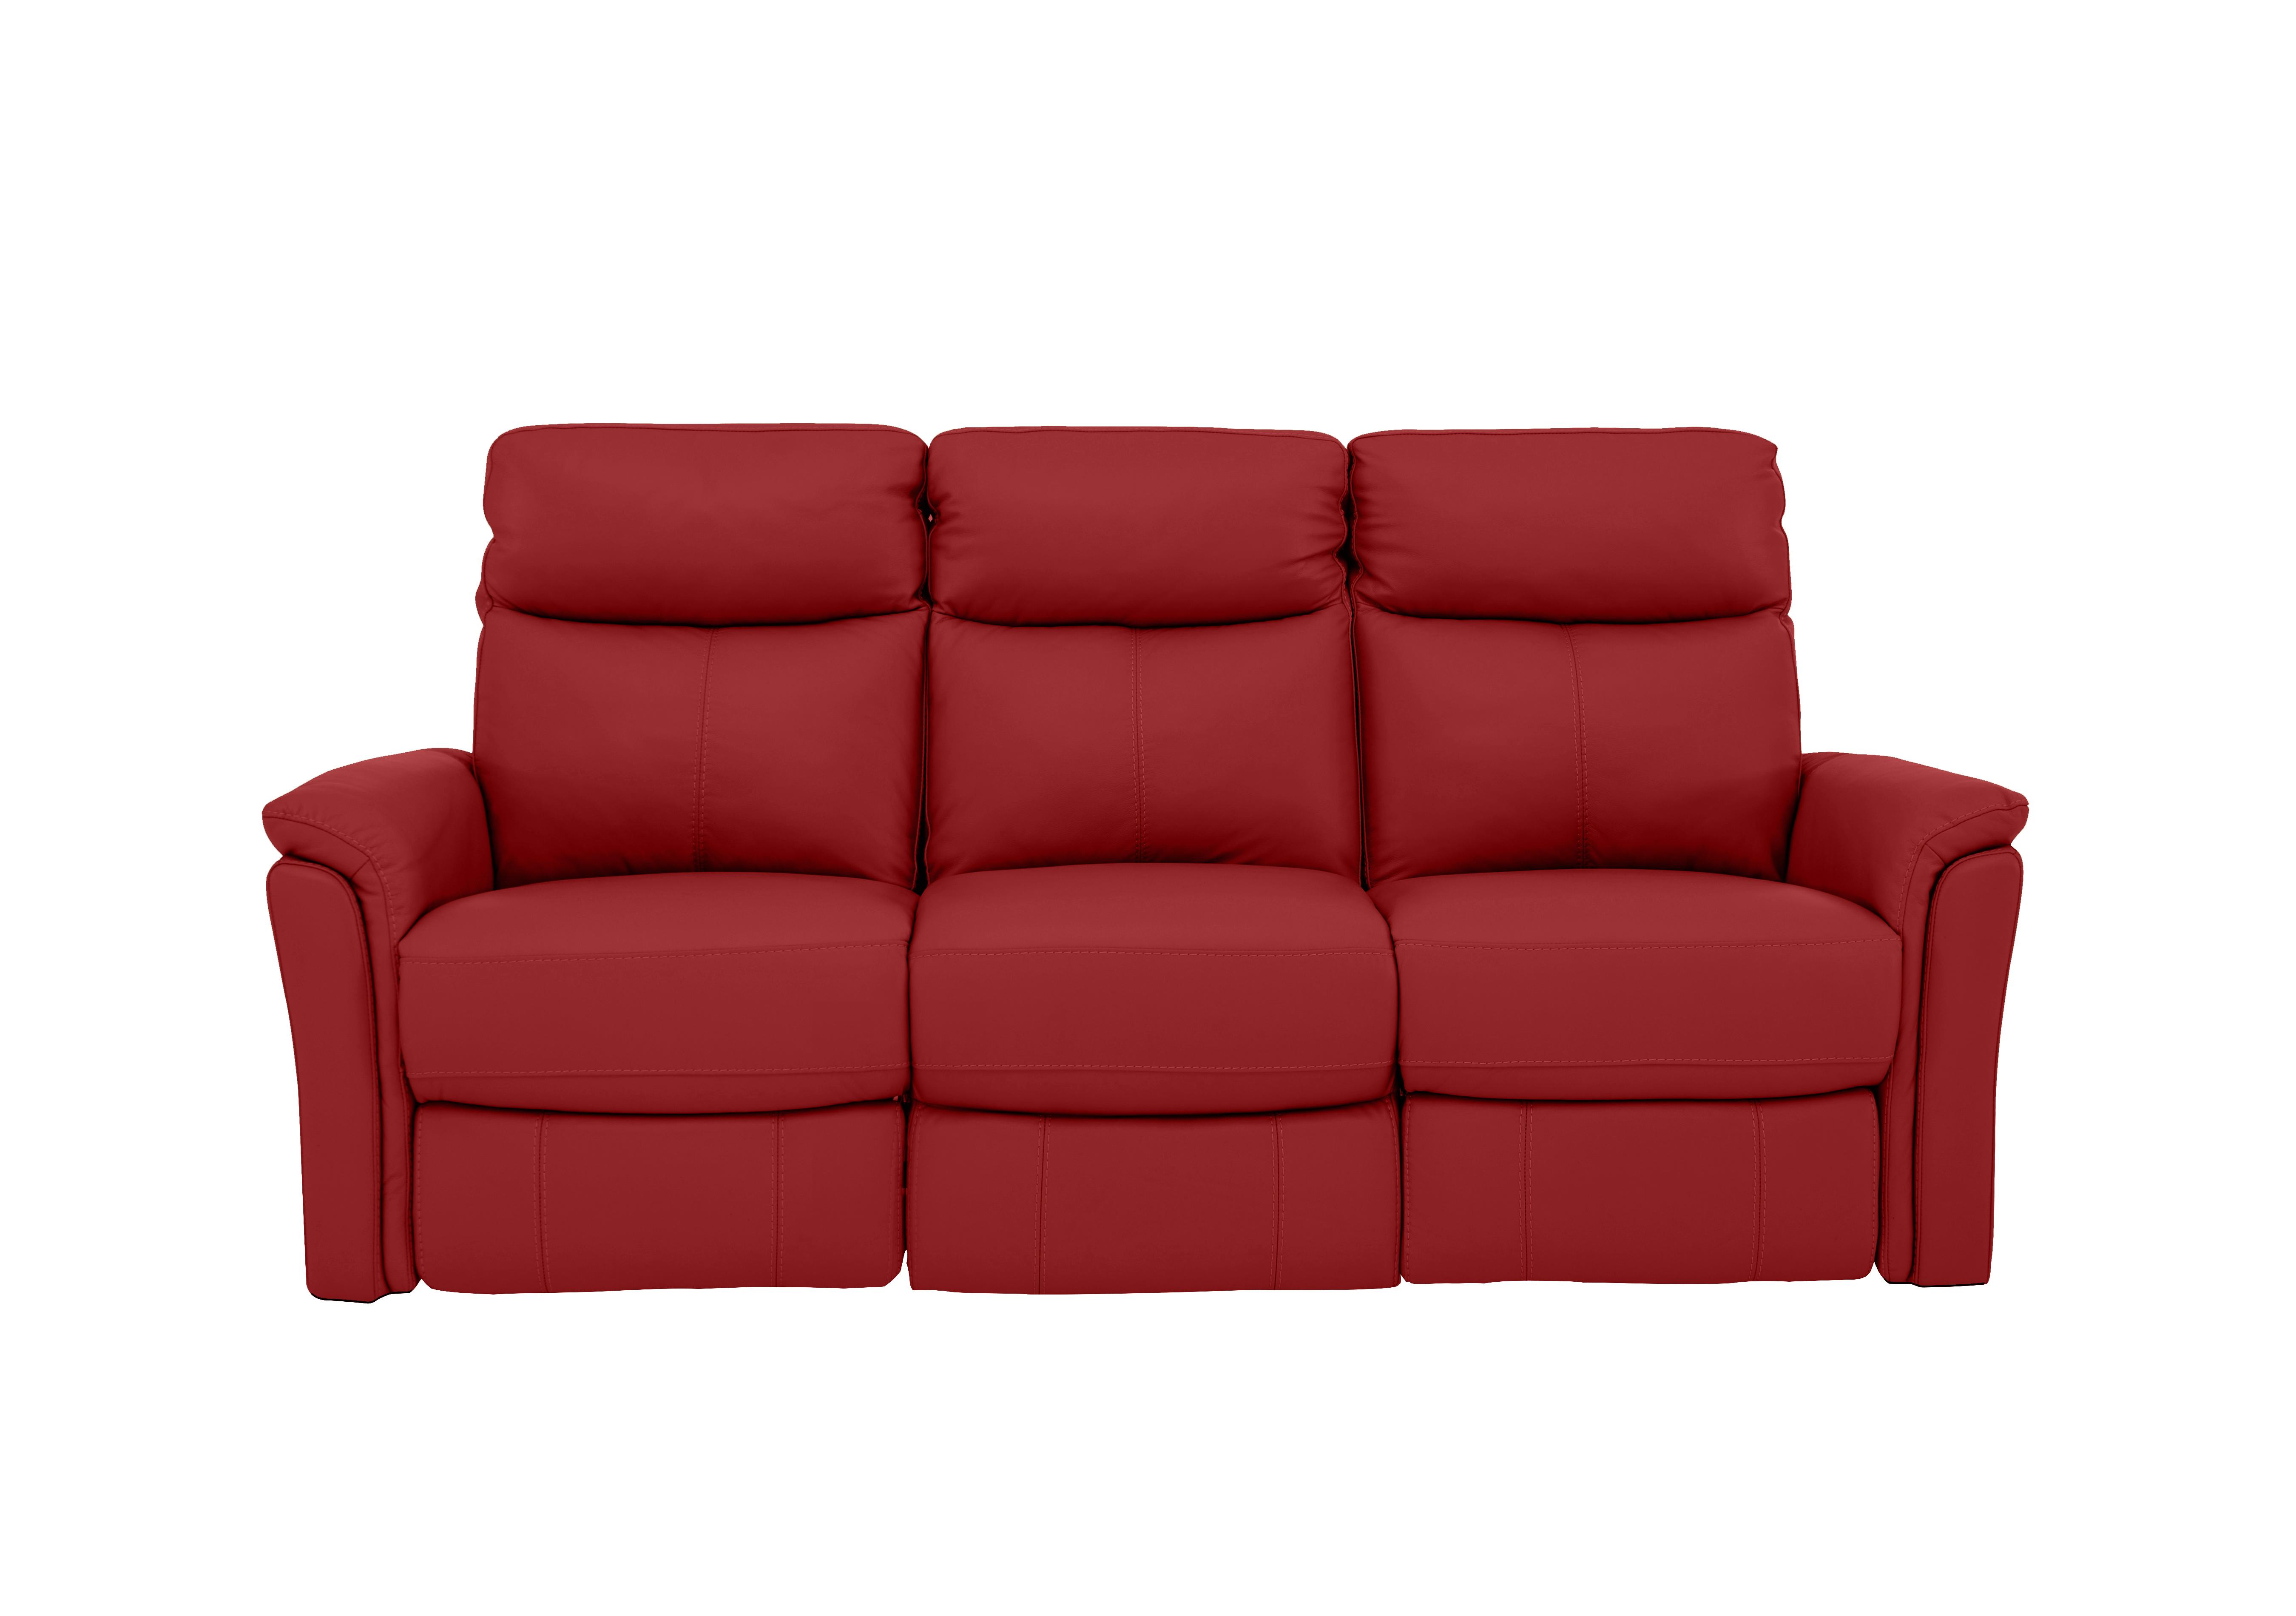 Compact Collection Piccolo 3 Seater Sofa in Bv-0008 Pure Red on Furniture Village